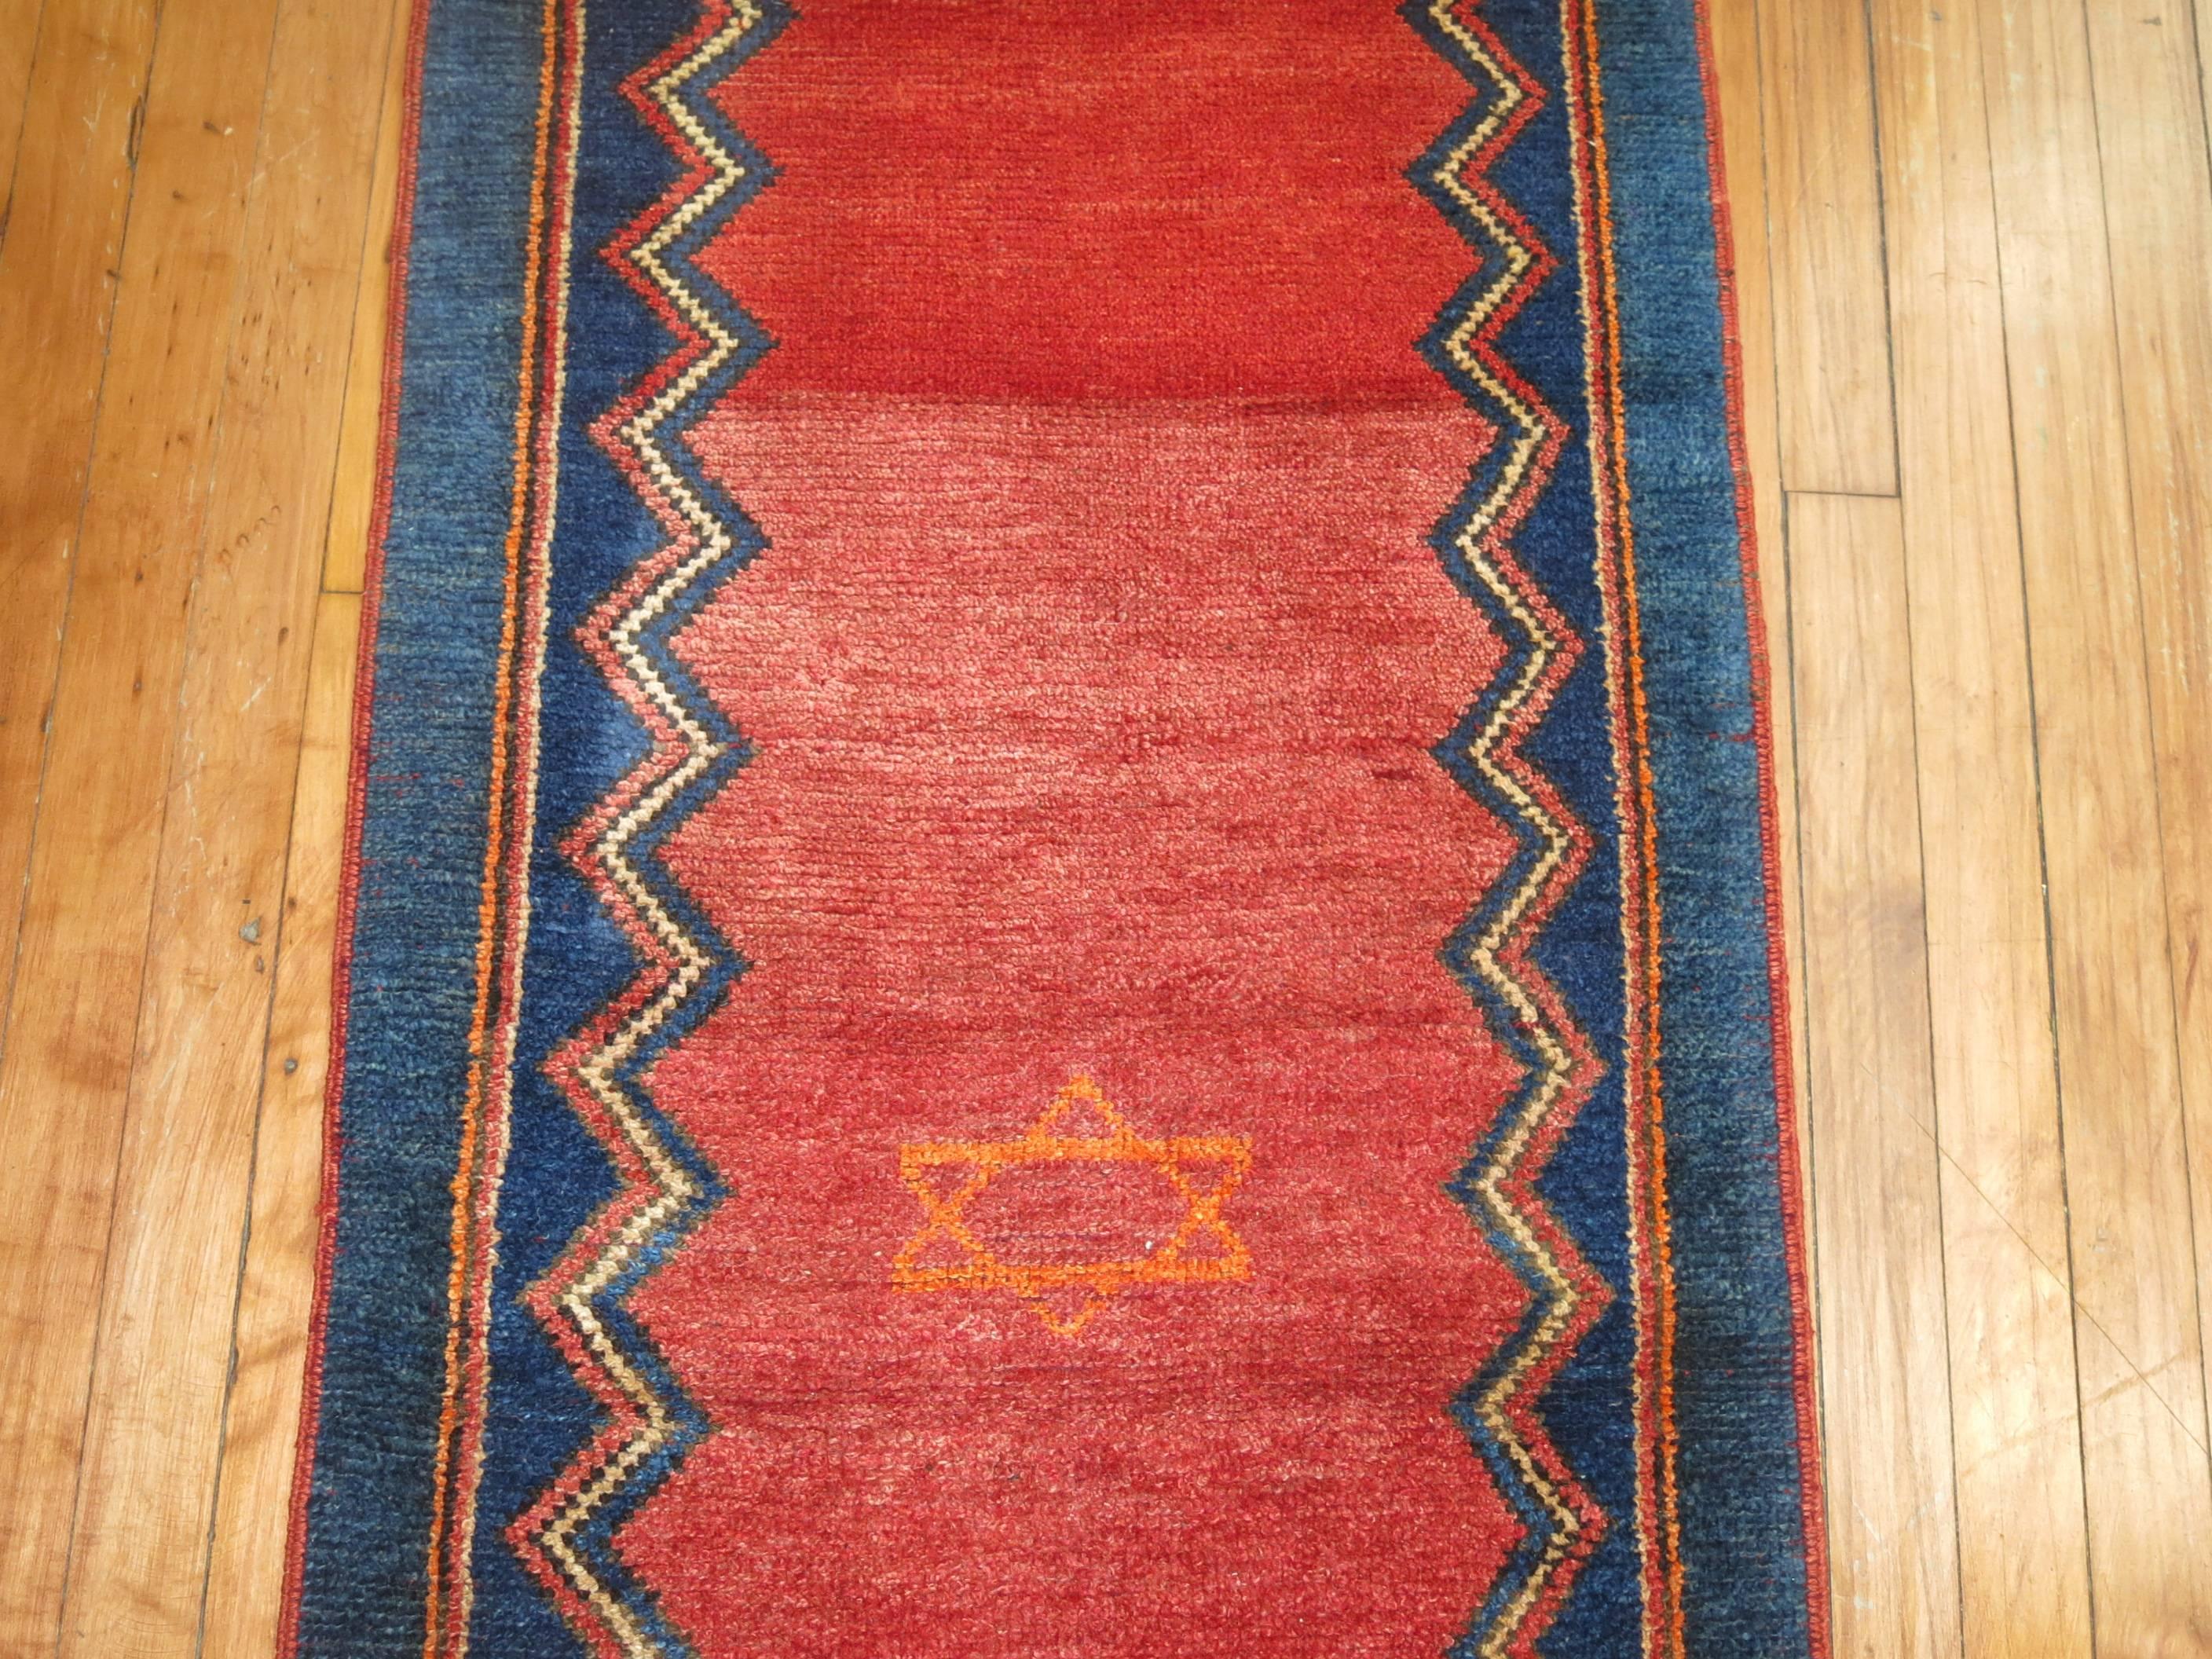 A vintage Turkish central Anatolian runner featuring four-star of David’s woven on a deep red/orange abrashed field and blue border.

2'2'' x 9'2''